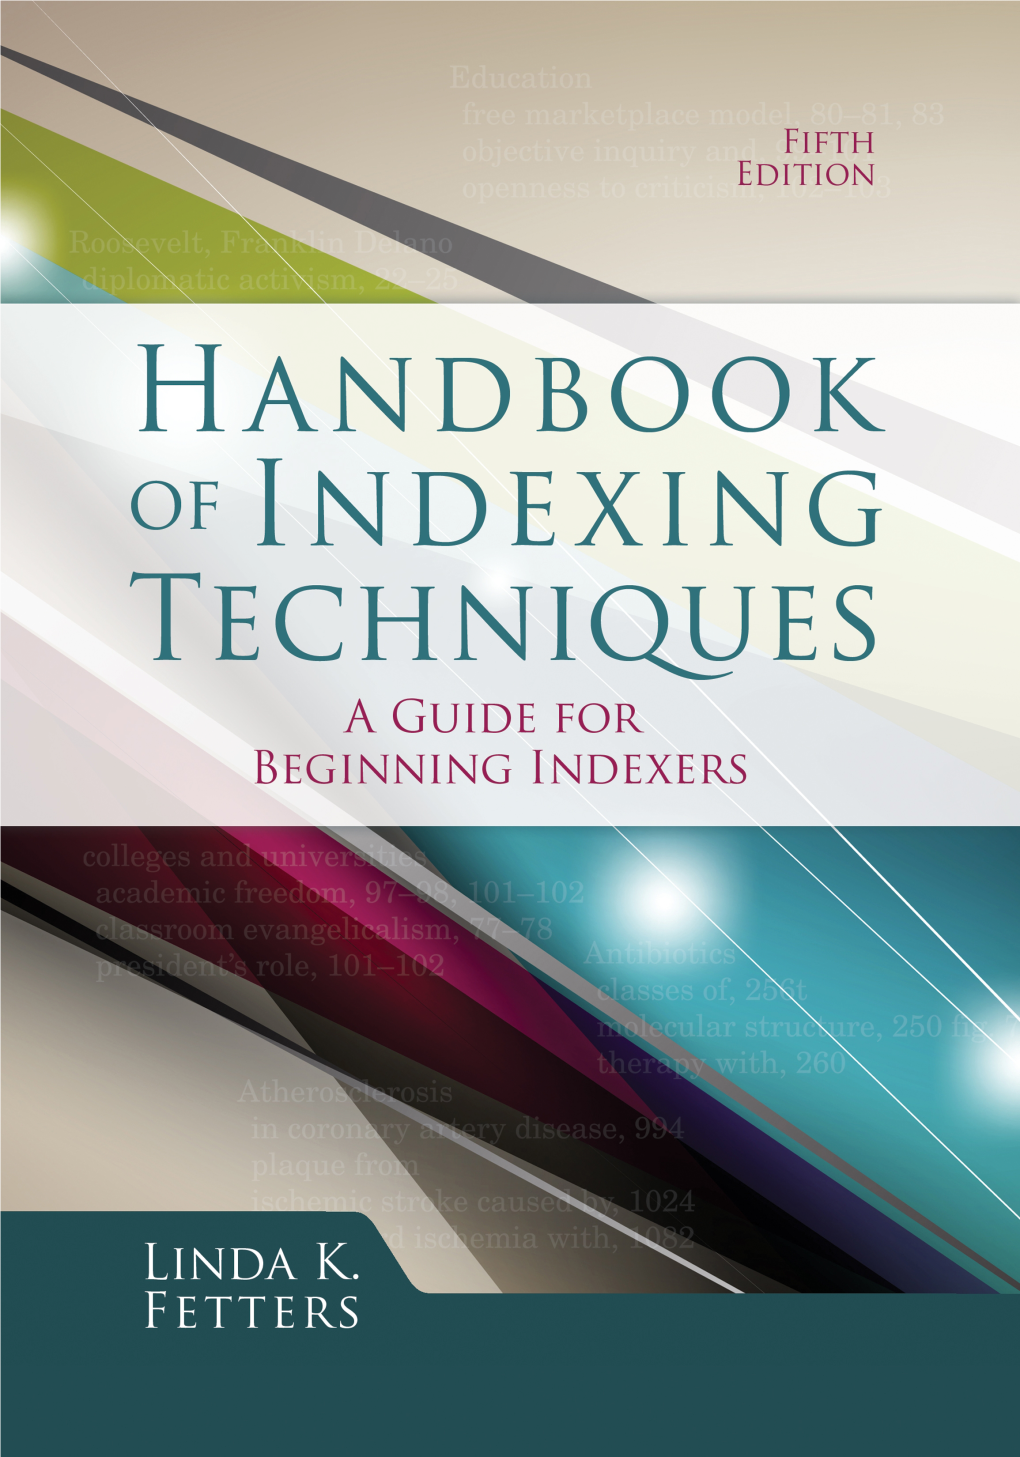 Handbook of Indexing Techniques, Fifth Edition Please Visit Our Bookstore to Order a Copy